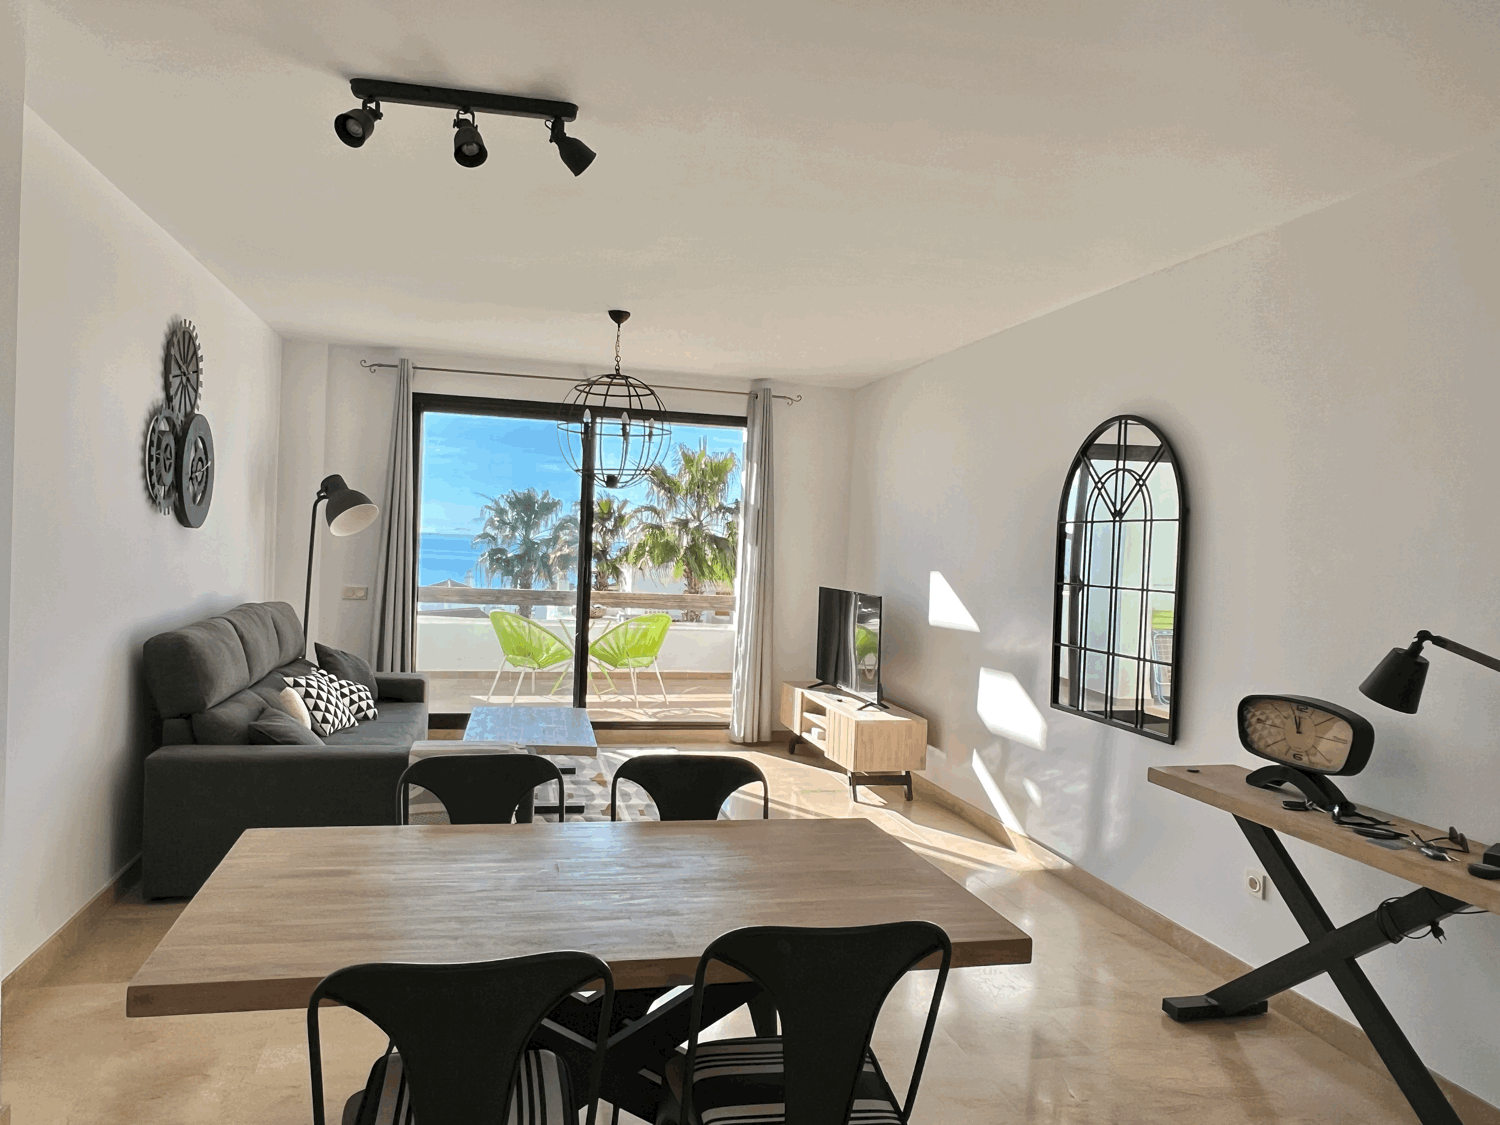 Charming two bedroom apartment in Alcaidesa with beautiful sea views